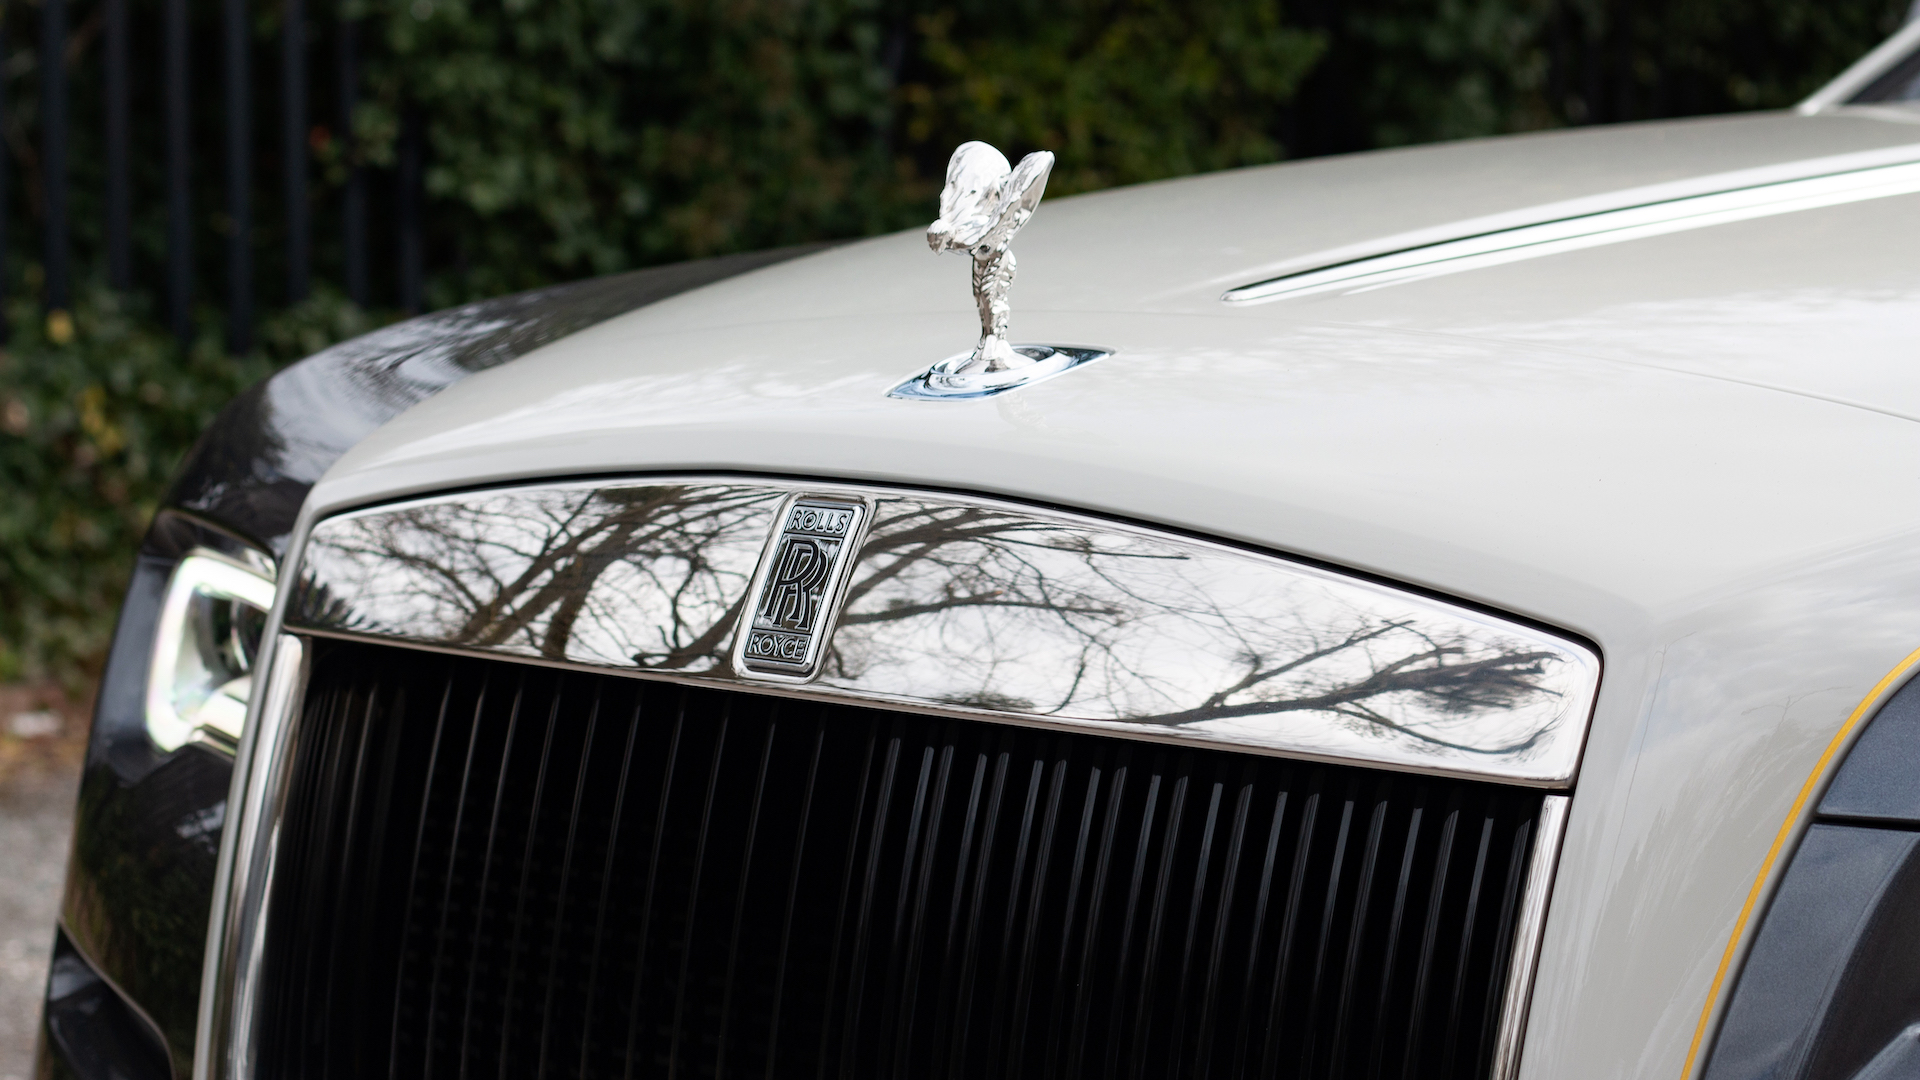 Legendary feat RollRoyce Wraith Eagle VIII Edition unveiled Check detail  here  NewsTrack English 1